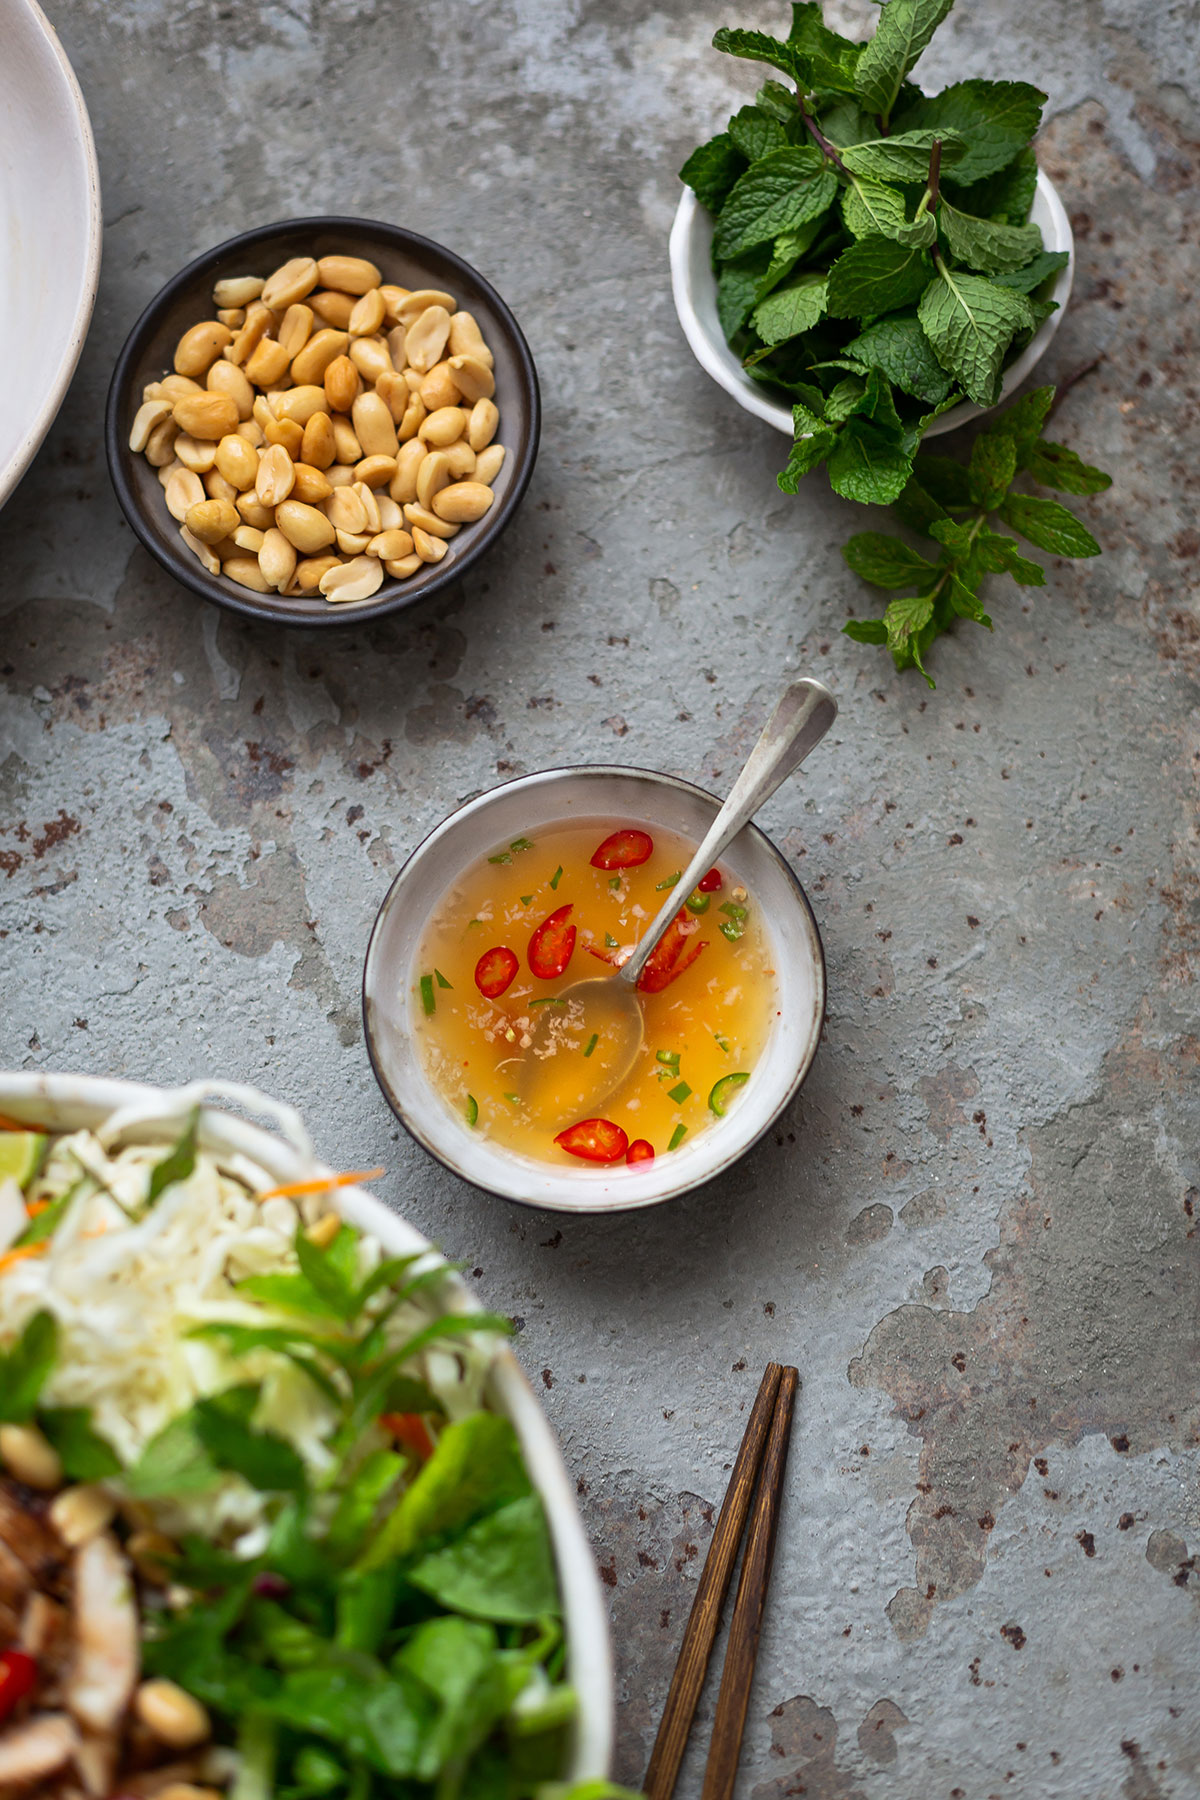 Nuoc cham dressing with sliced red chillies for a Vietnamese rice noodle salad with grilled chicken recipe